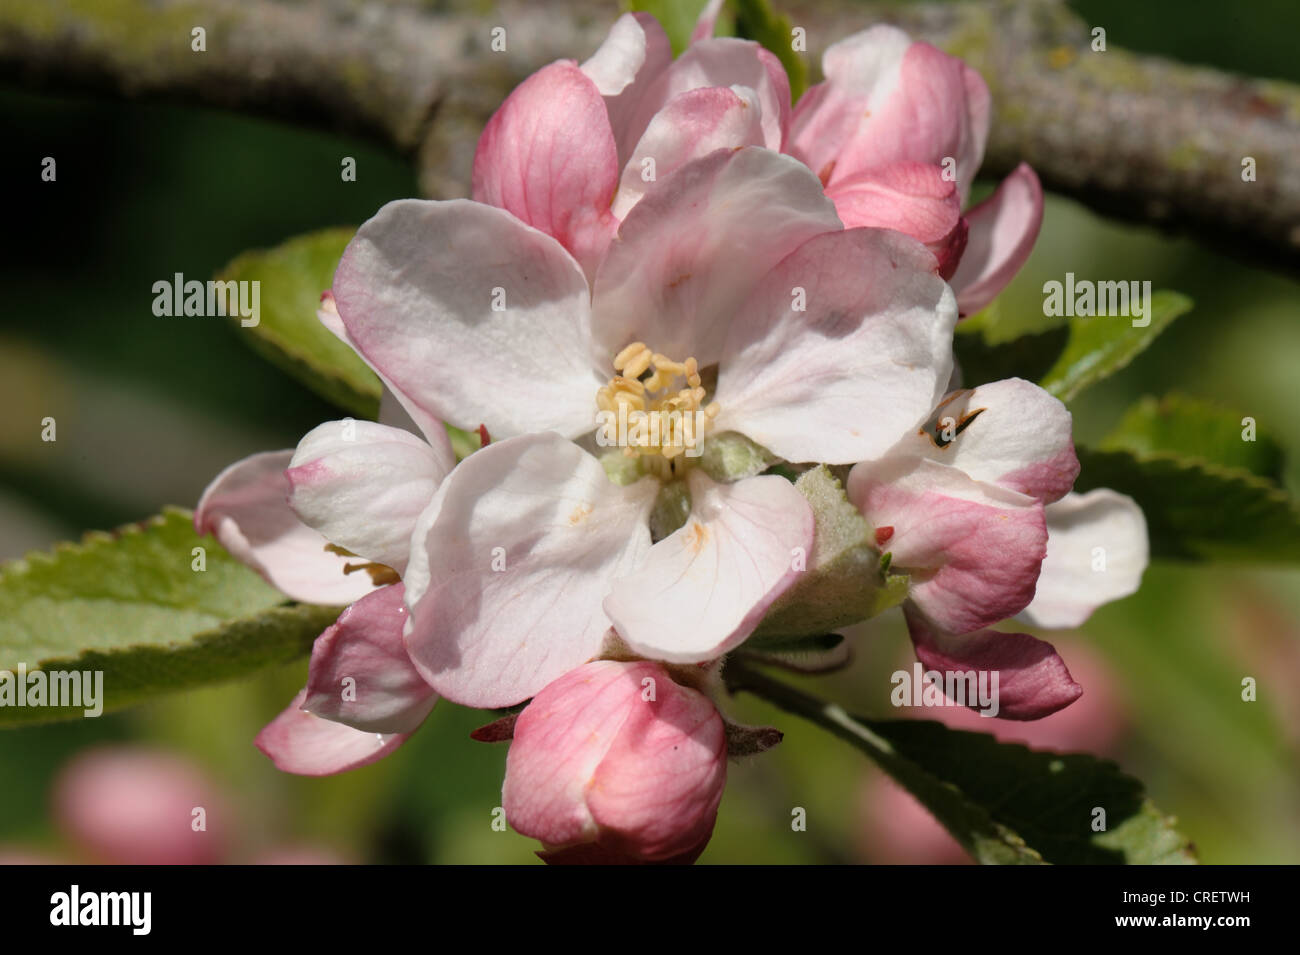 King flower and buds at pink bud stage on an apple tree in spring Stock Photo